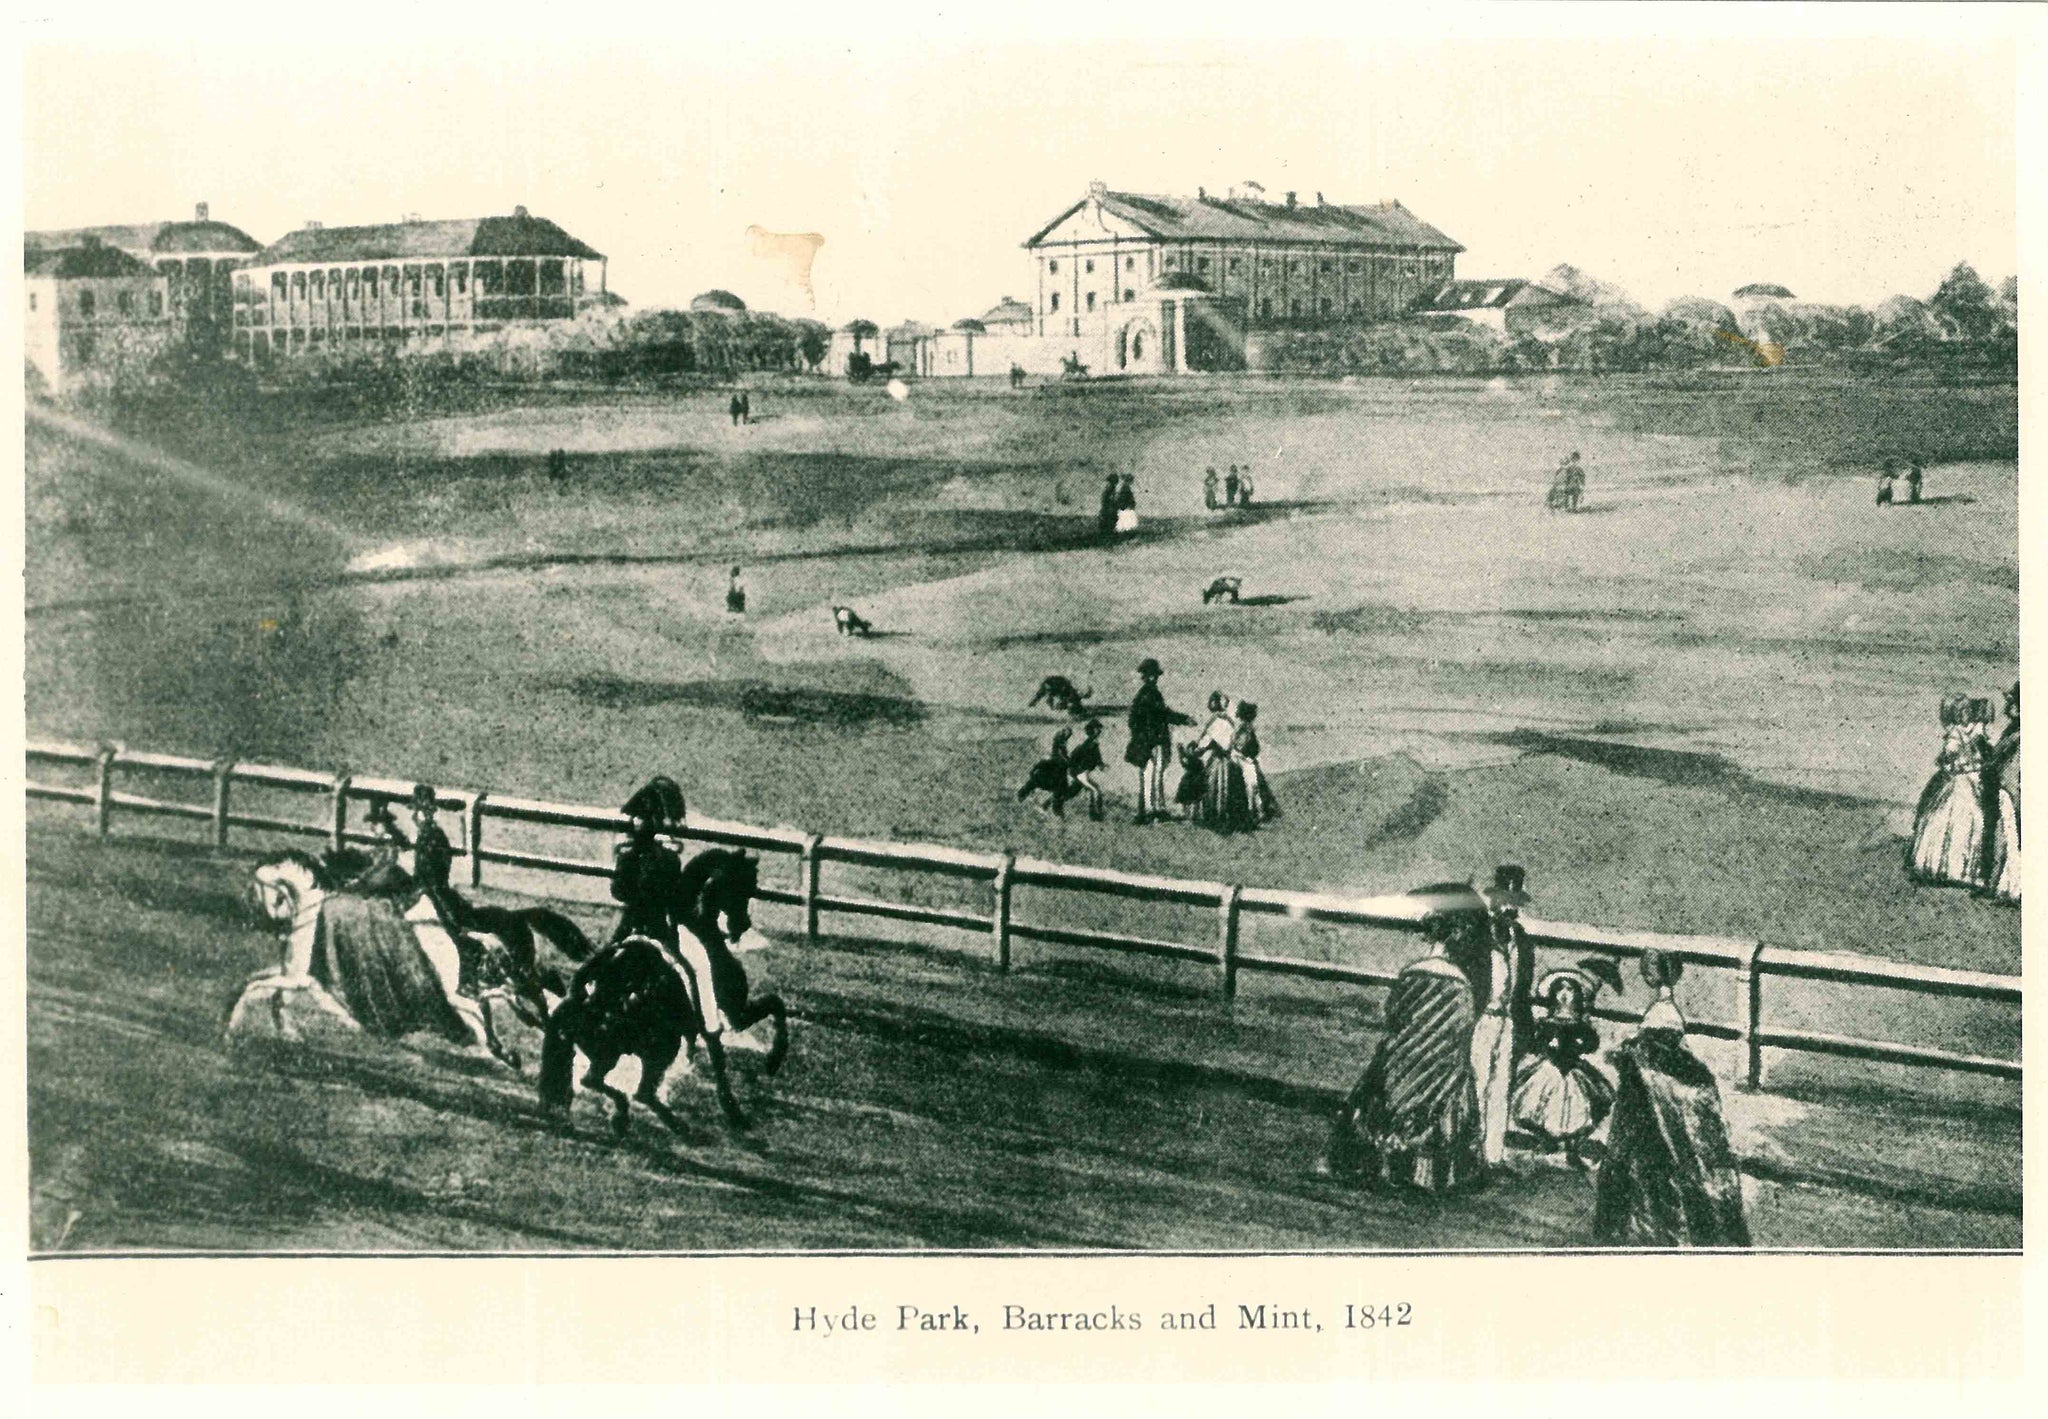  Early illustration of Hyde Park and Barracks Sydney, 1842. City of Sydney Archives View of the northern end of Hyde Park showing Hyde Park Barracks and Mint Building in background with horse racing track. Showing men, women and children.